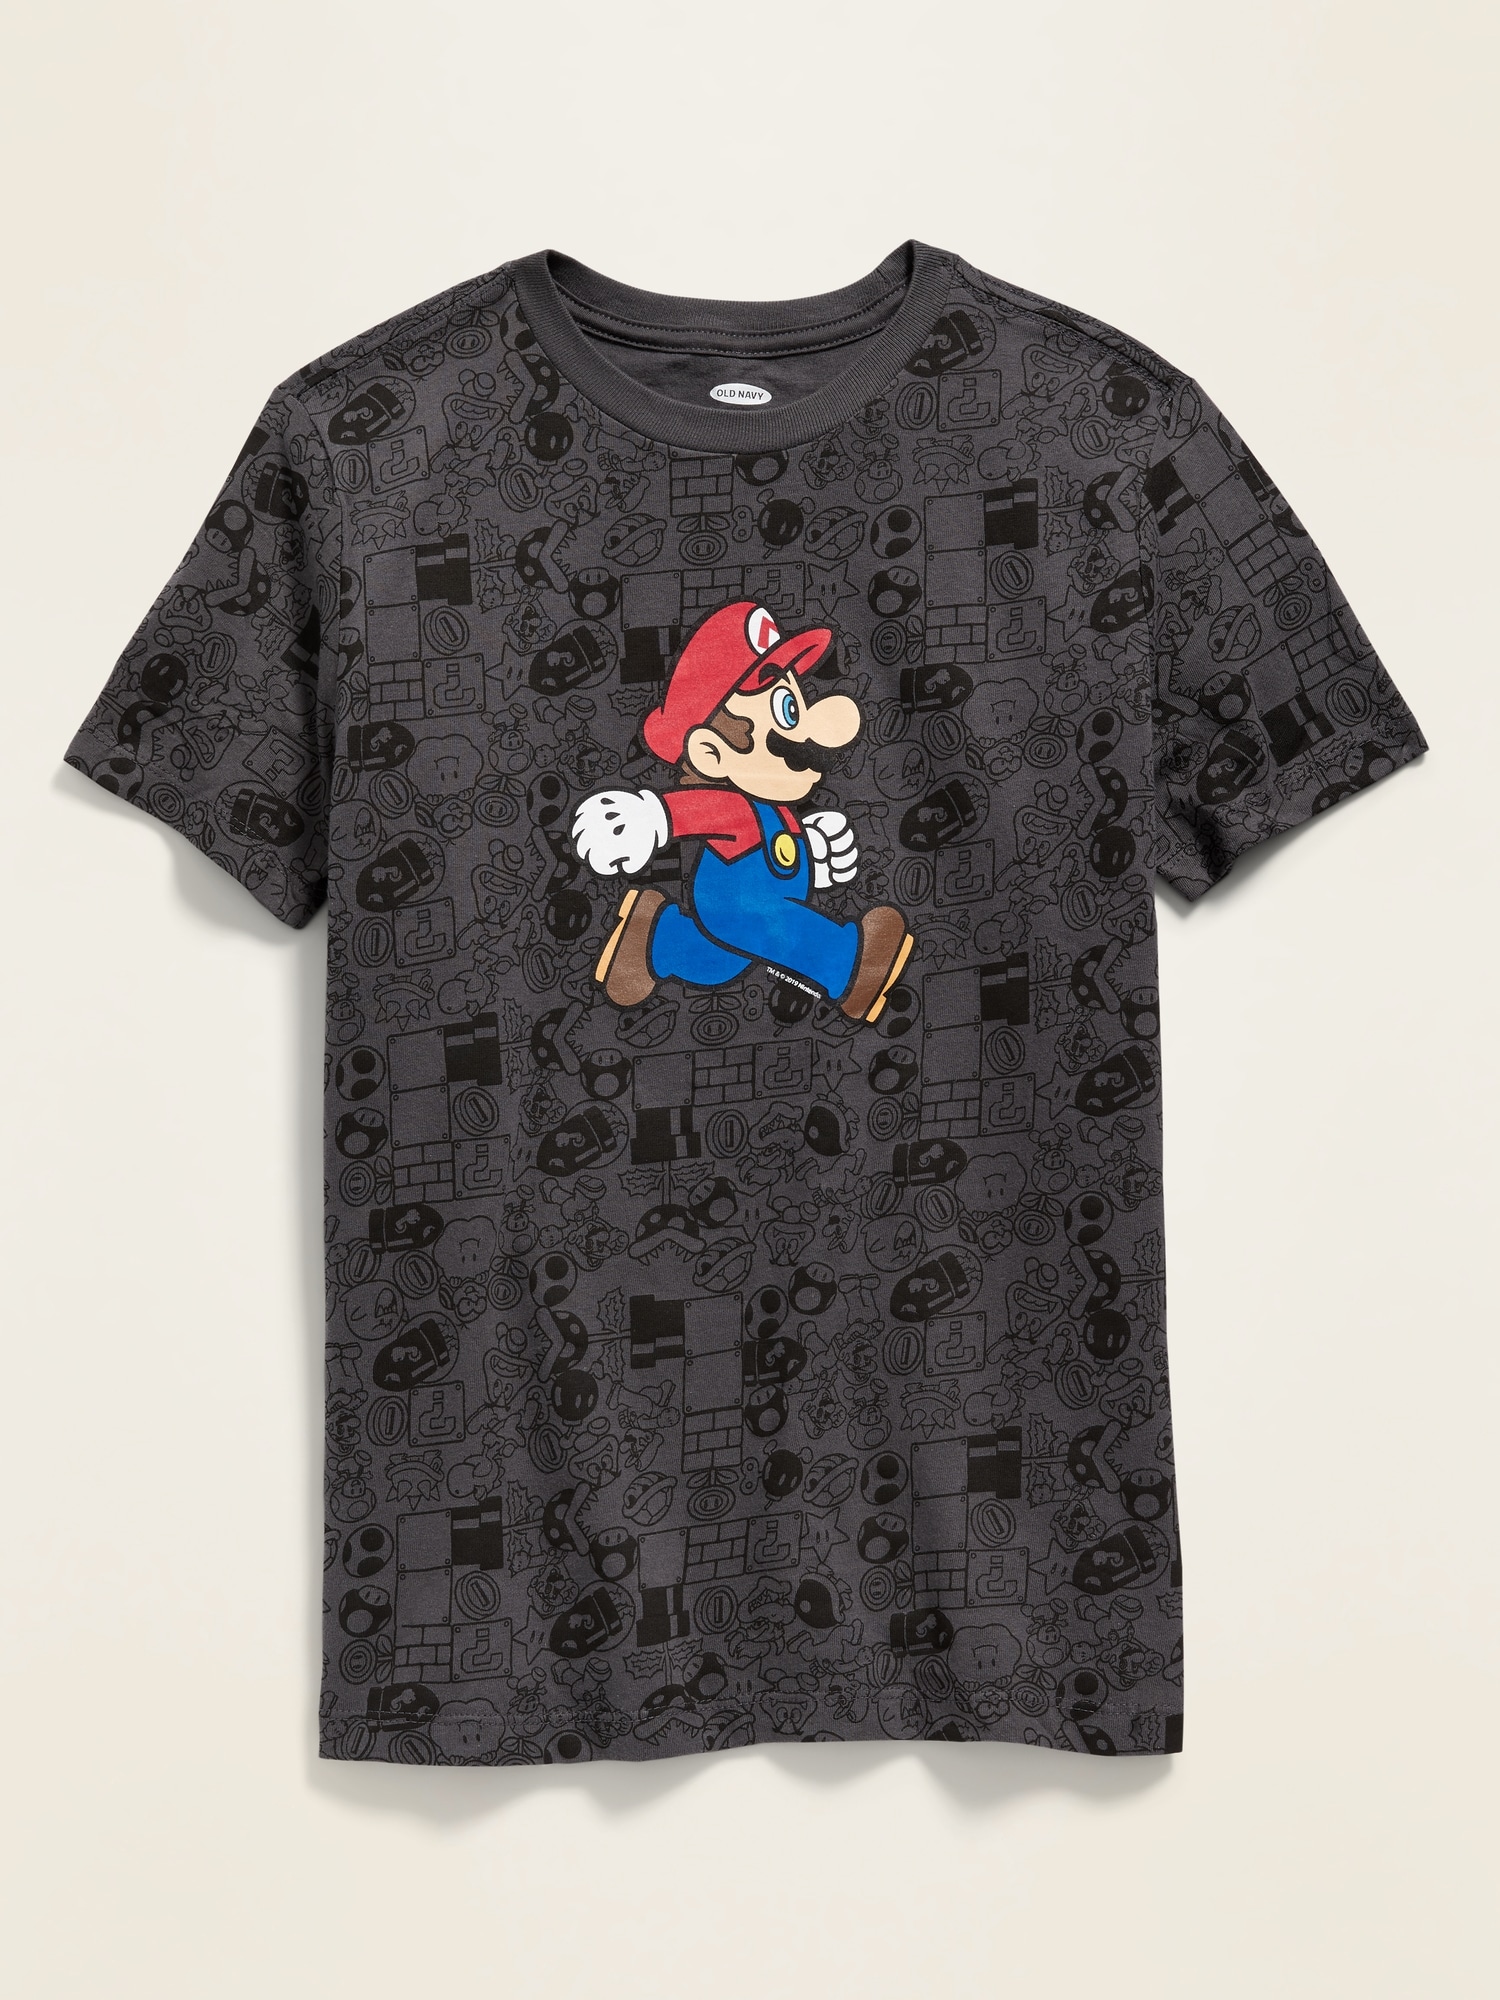 Gender-Neutral Super Mario™ Graphic Printed T-Shirt For Kids | Old Navy